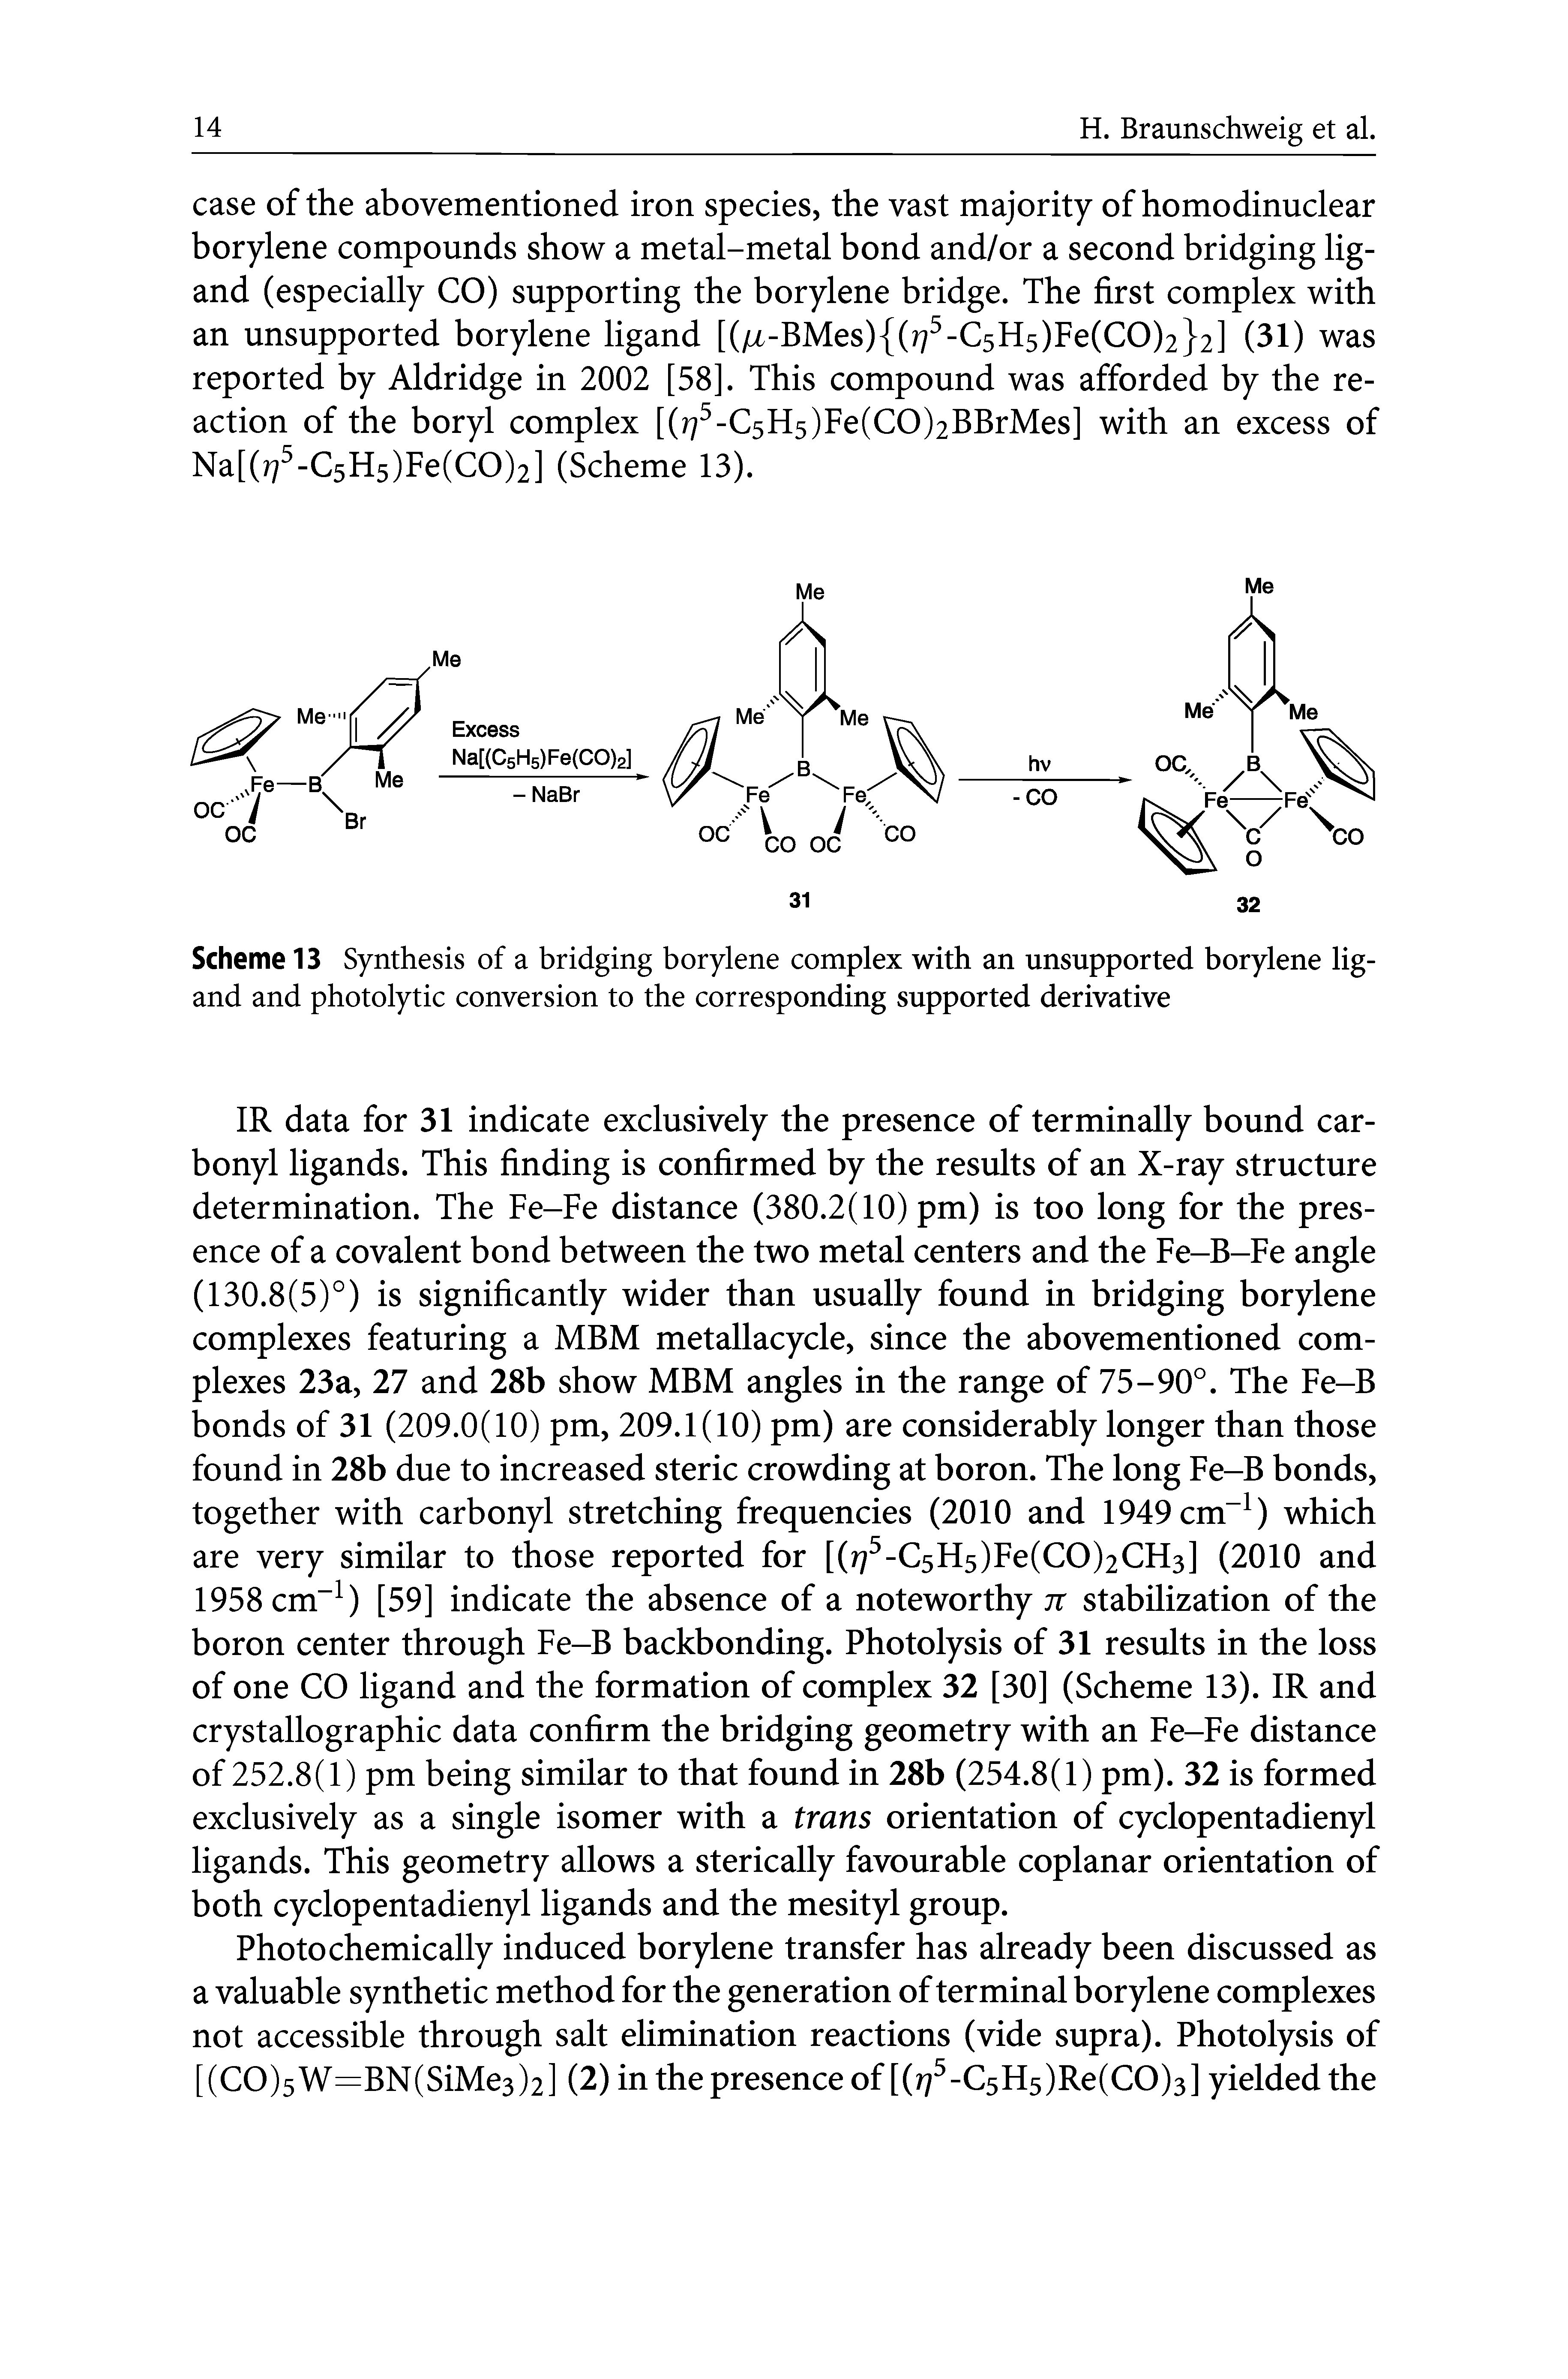 Scheme 13 Synthesis of a bridging borylene complex with an unsupported borylene ligand and photolytic conversion to the corresponding supported derivative...